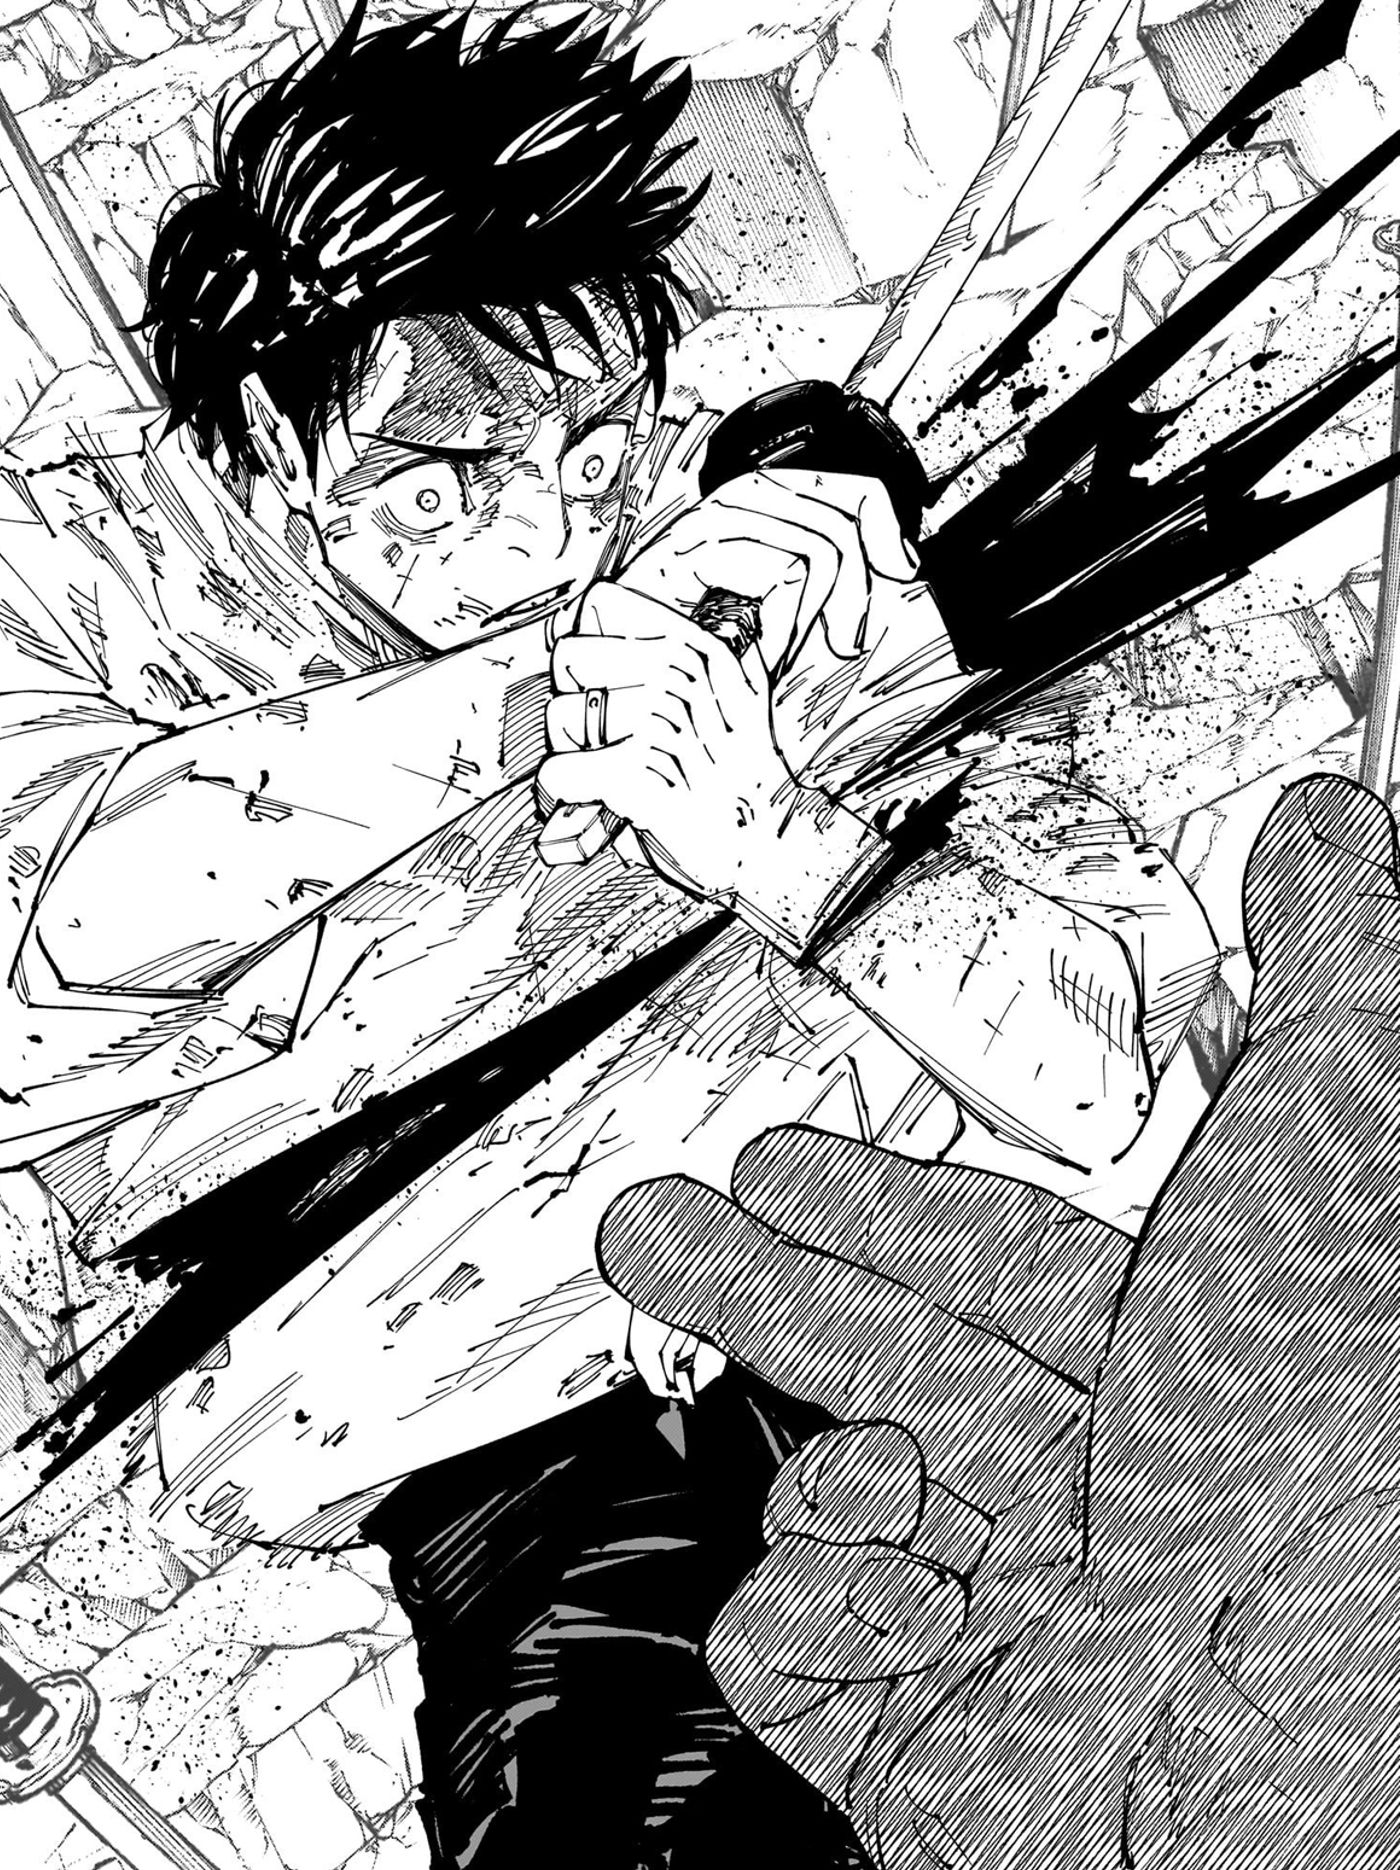 Yuta is slashed by sukuna whose hand can be seen in the bottom right corner of the panel pointing right at Yuta in jujutsu kaisen